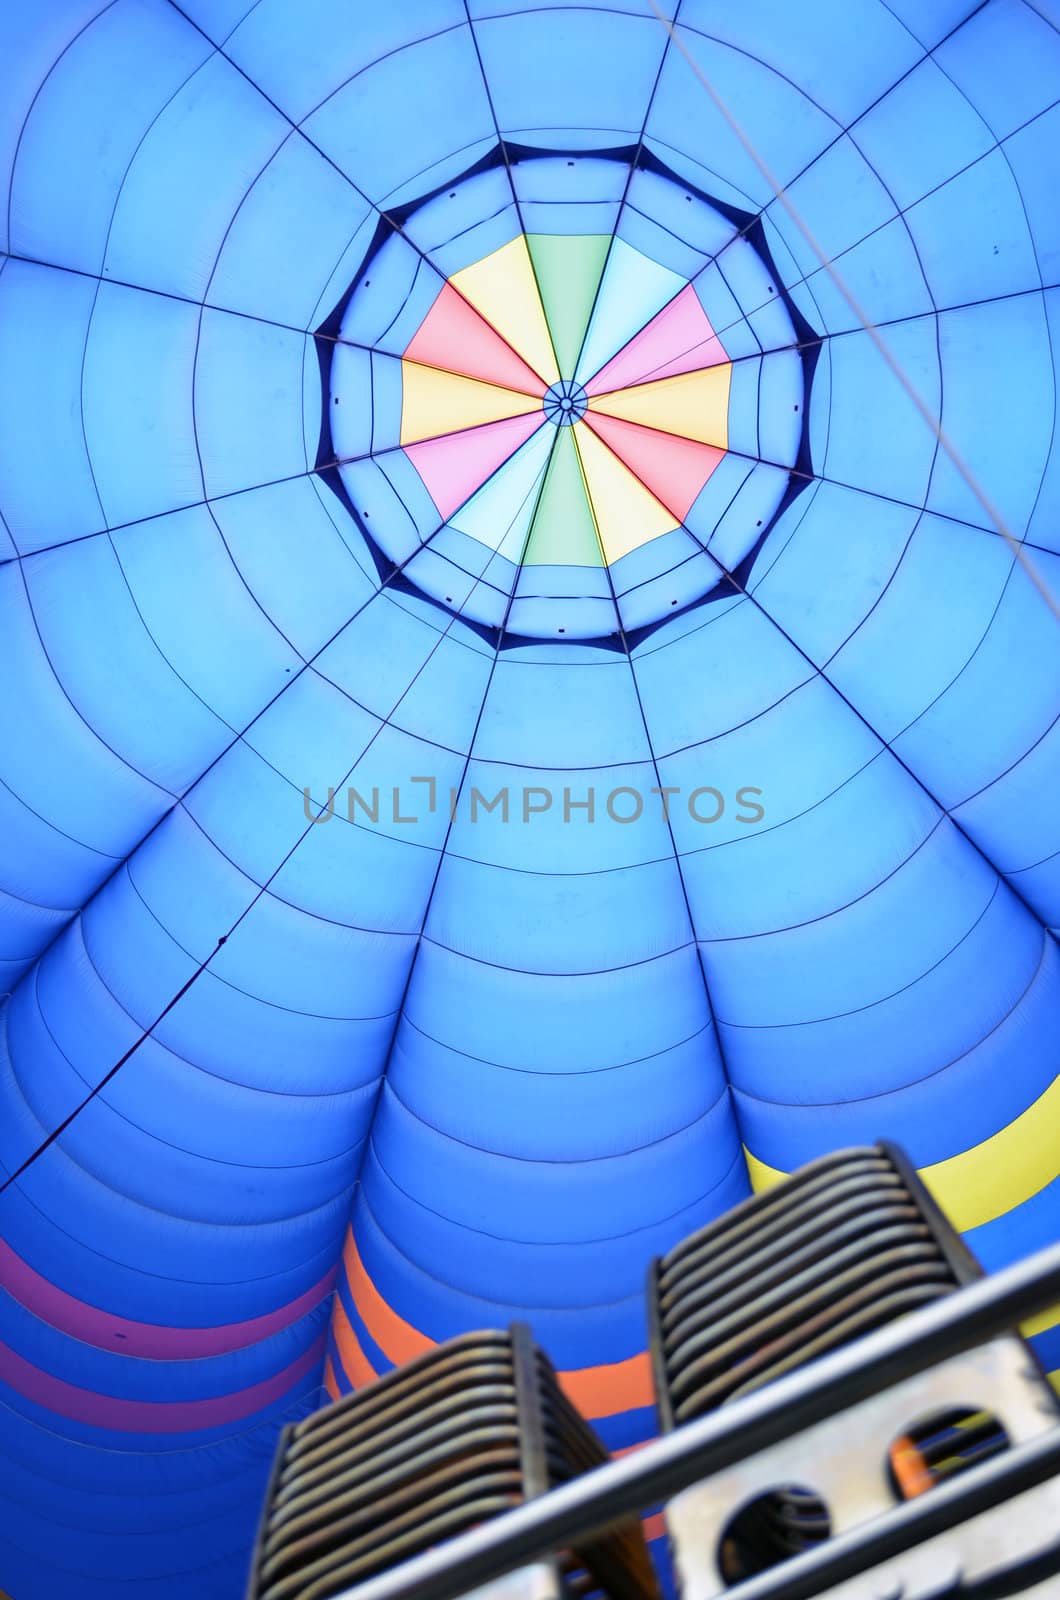 View of a hot air balloon from inside with burners